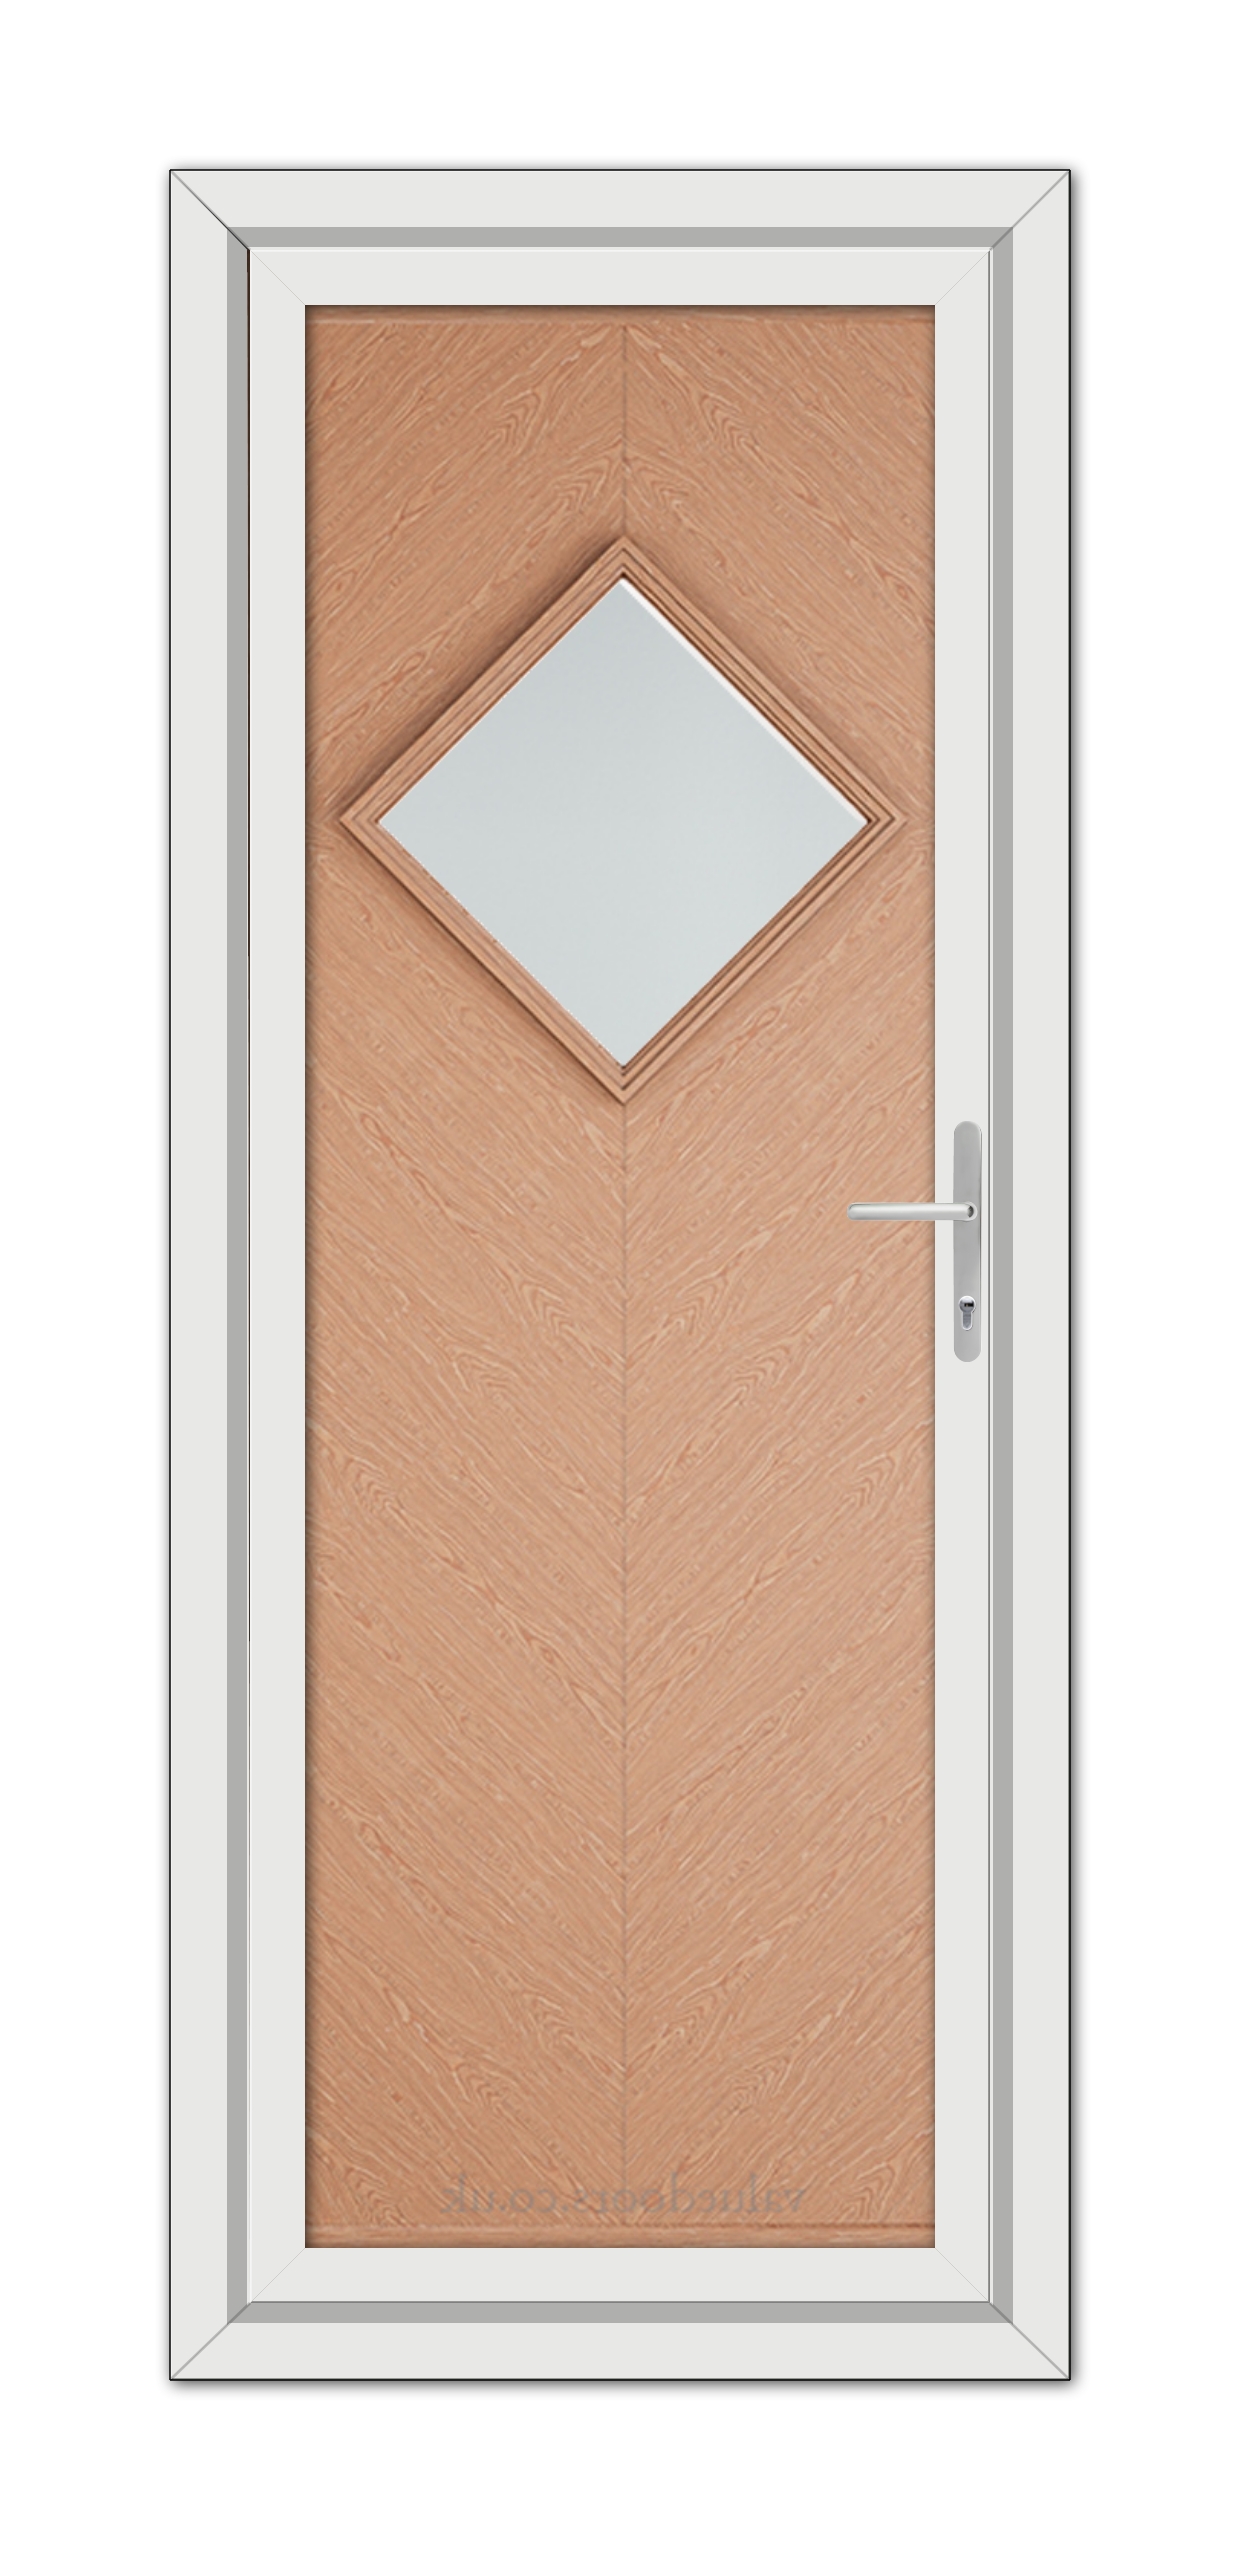 A modern Irish Oak Hamburg uPVC door with a diamond-shaped window, framed in white with a metal handle on the right side.